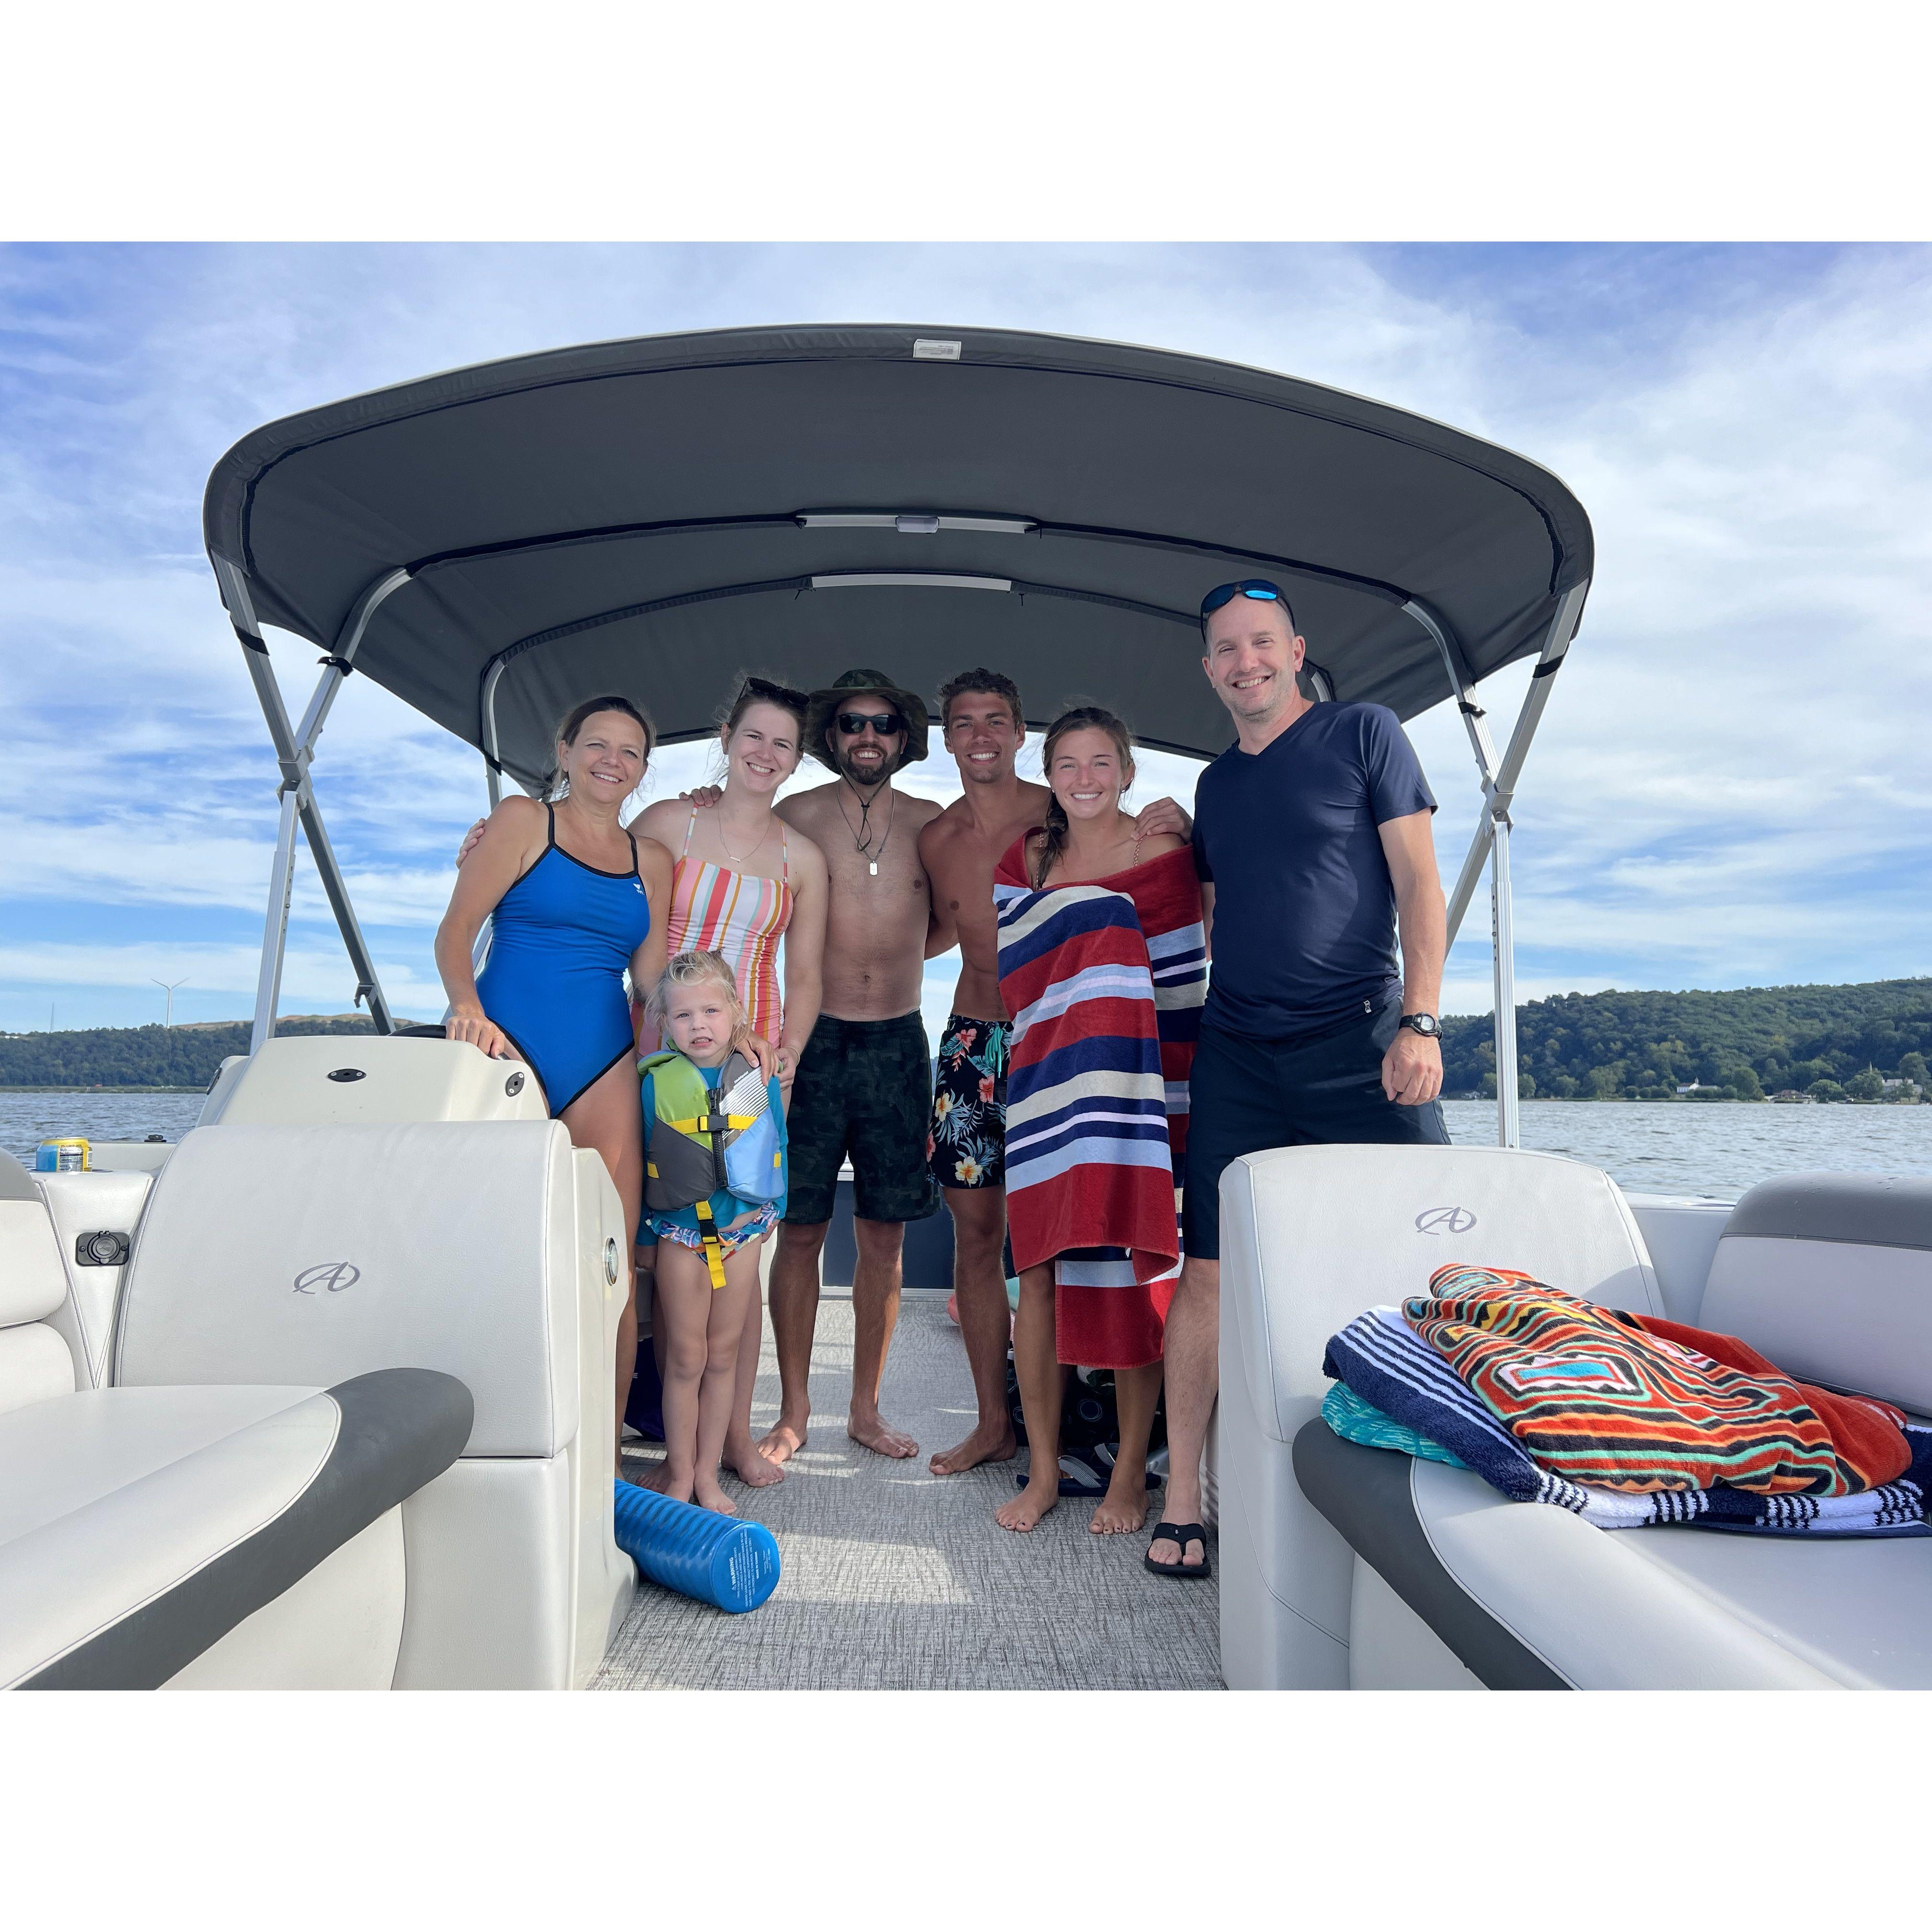 Boating day with the Ramsey family